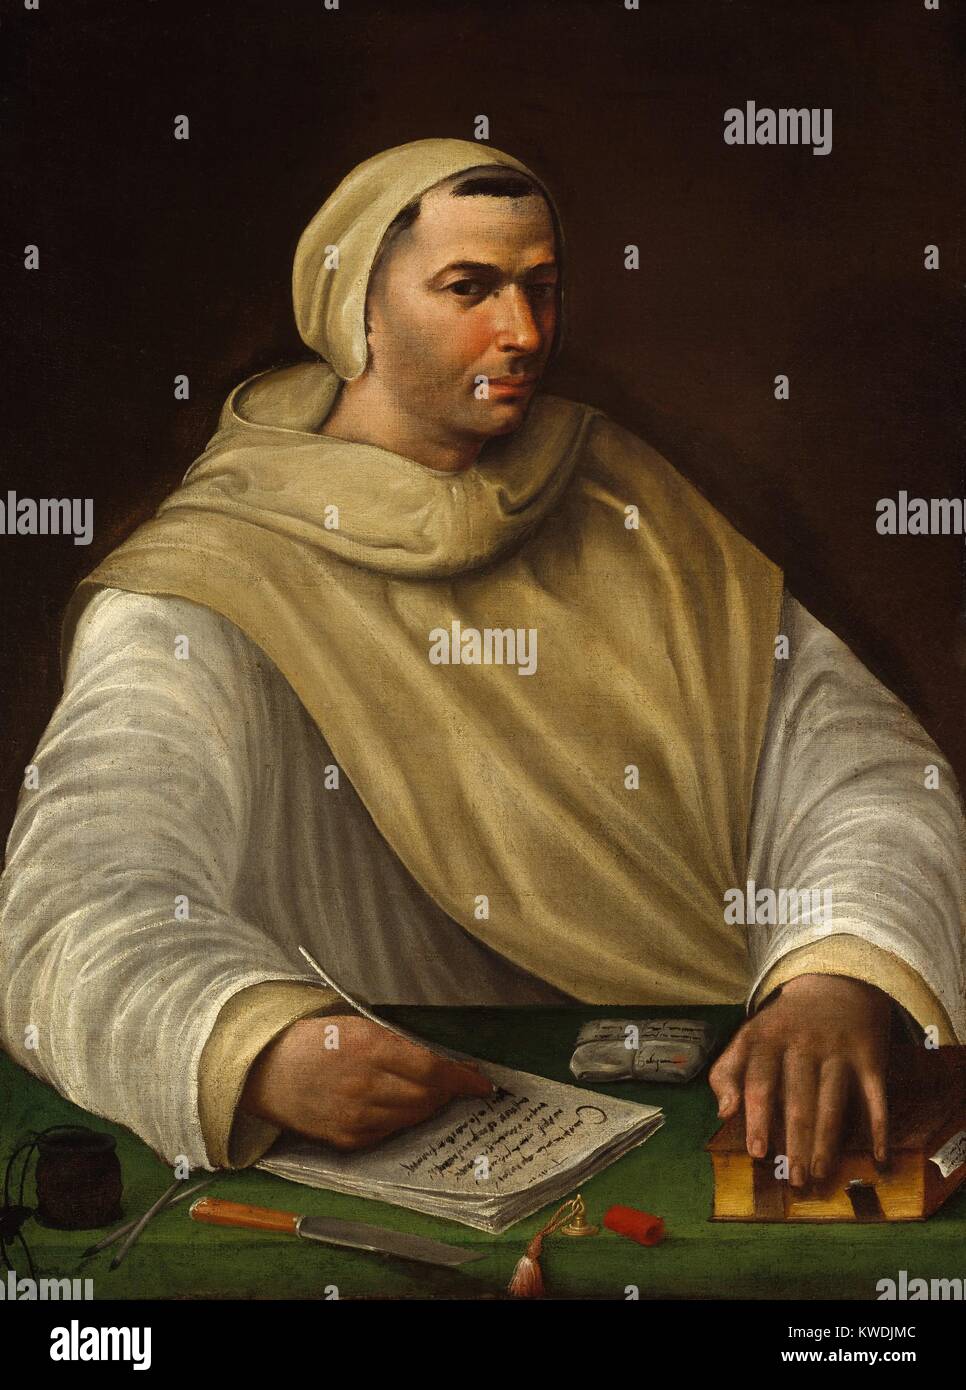 PORTRAIT OF AN OLIVETAN MONK, by Baldassare Tommaso Peruzzi, 1500-36, Italian Renaissance oil painting. An Olivetan monk, surrounded by his writing materials, letters, and a book closed with a clasp. Olivetans were formed in 1344 within the Benedictine Order (BSLOC 2017 16 87) Stock Photo